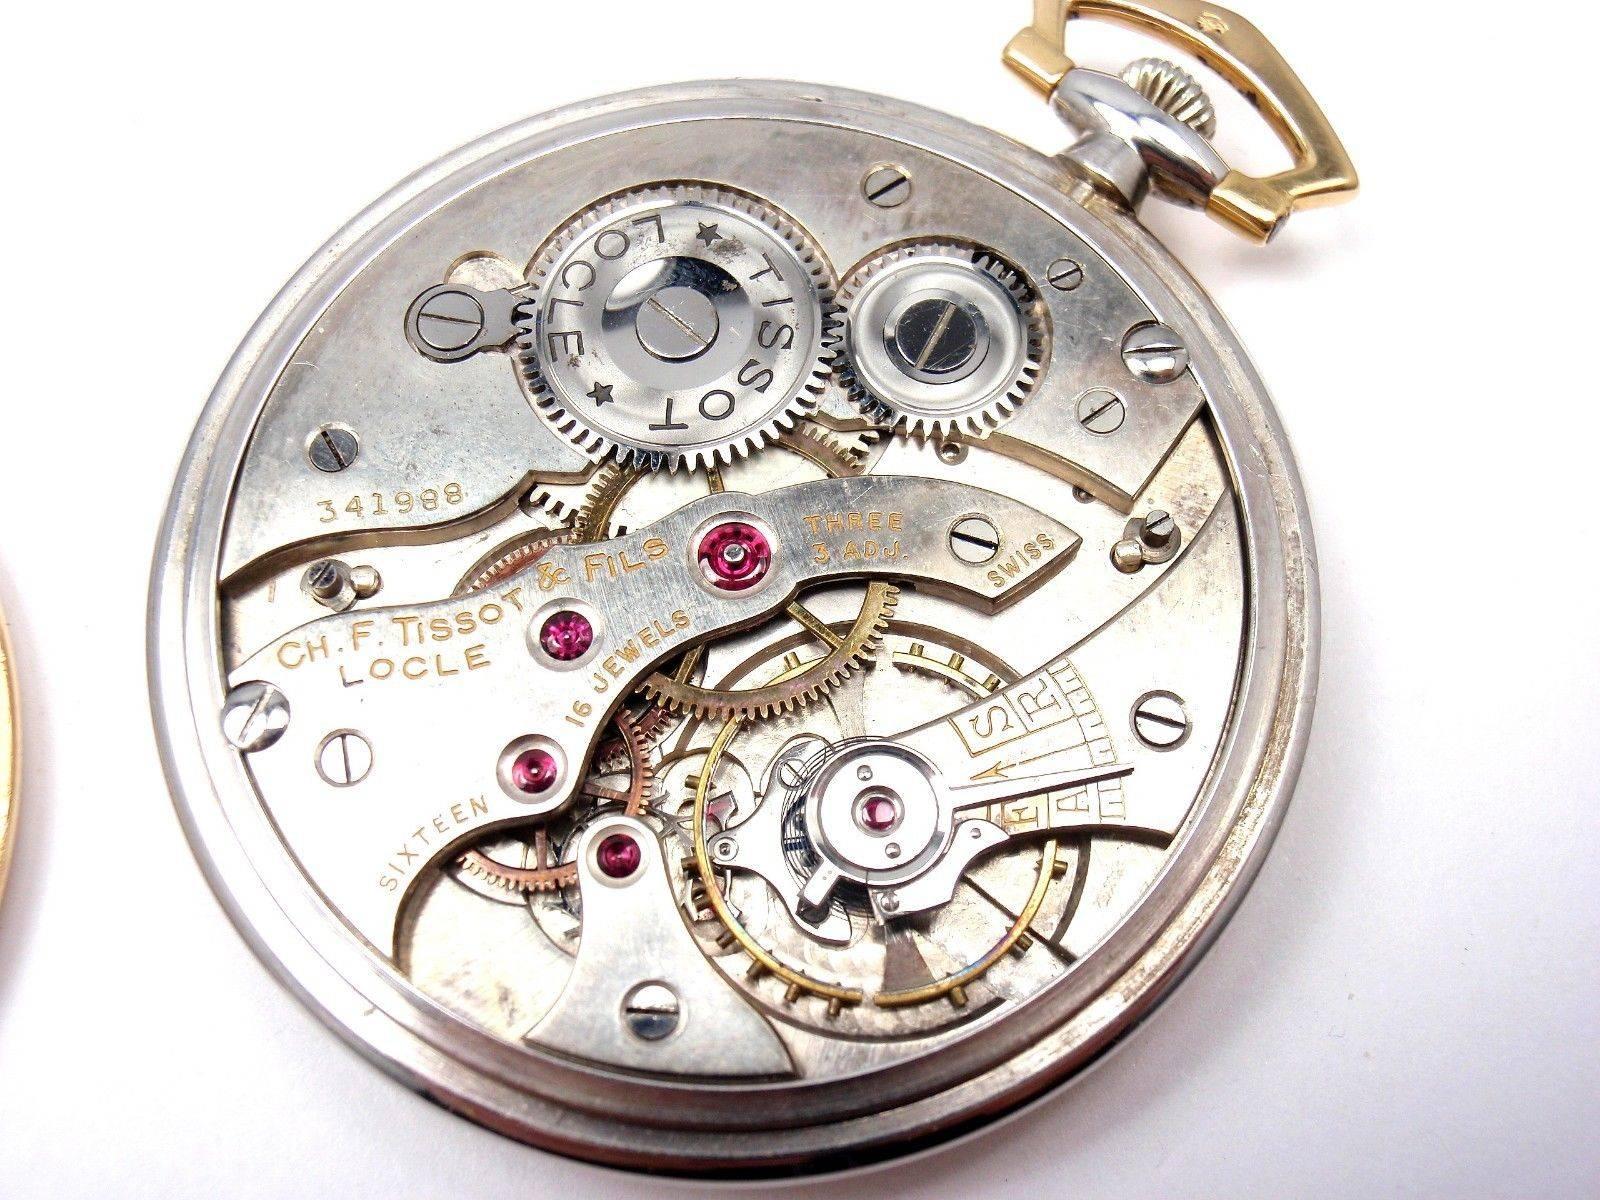 Van Cleef & Arpels Tissot Yellow and White Gold Pocket Watch 2